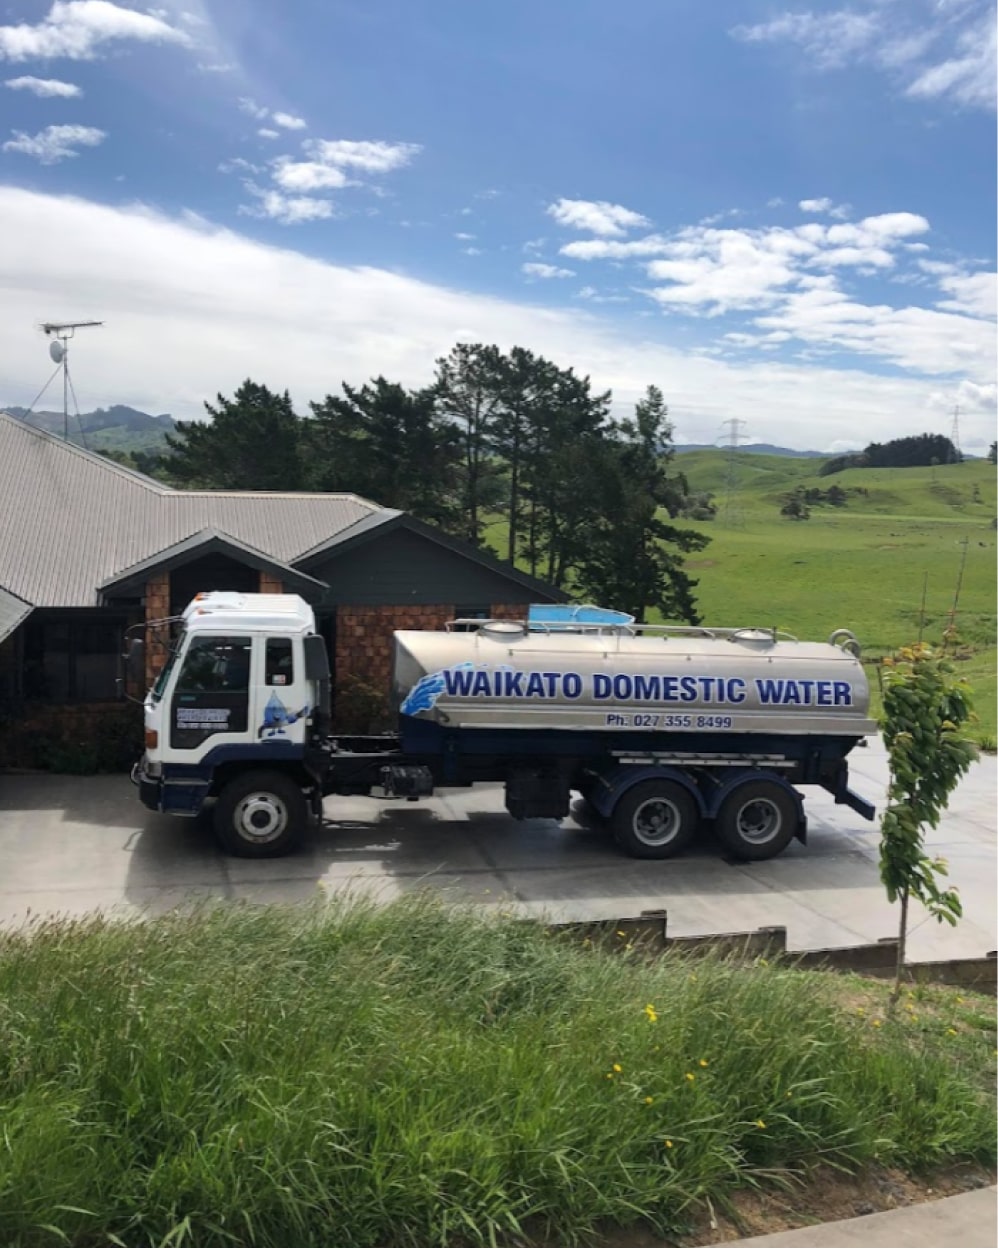 Water Being Delivered to Residential House on Driveway